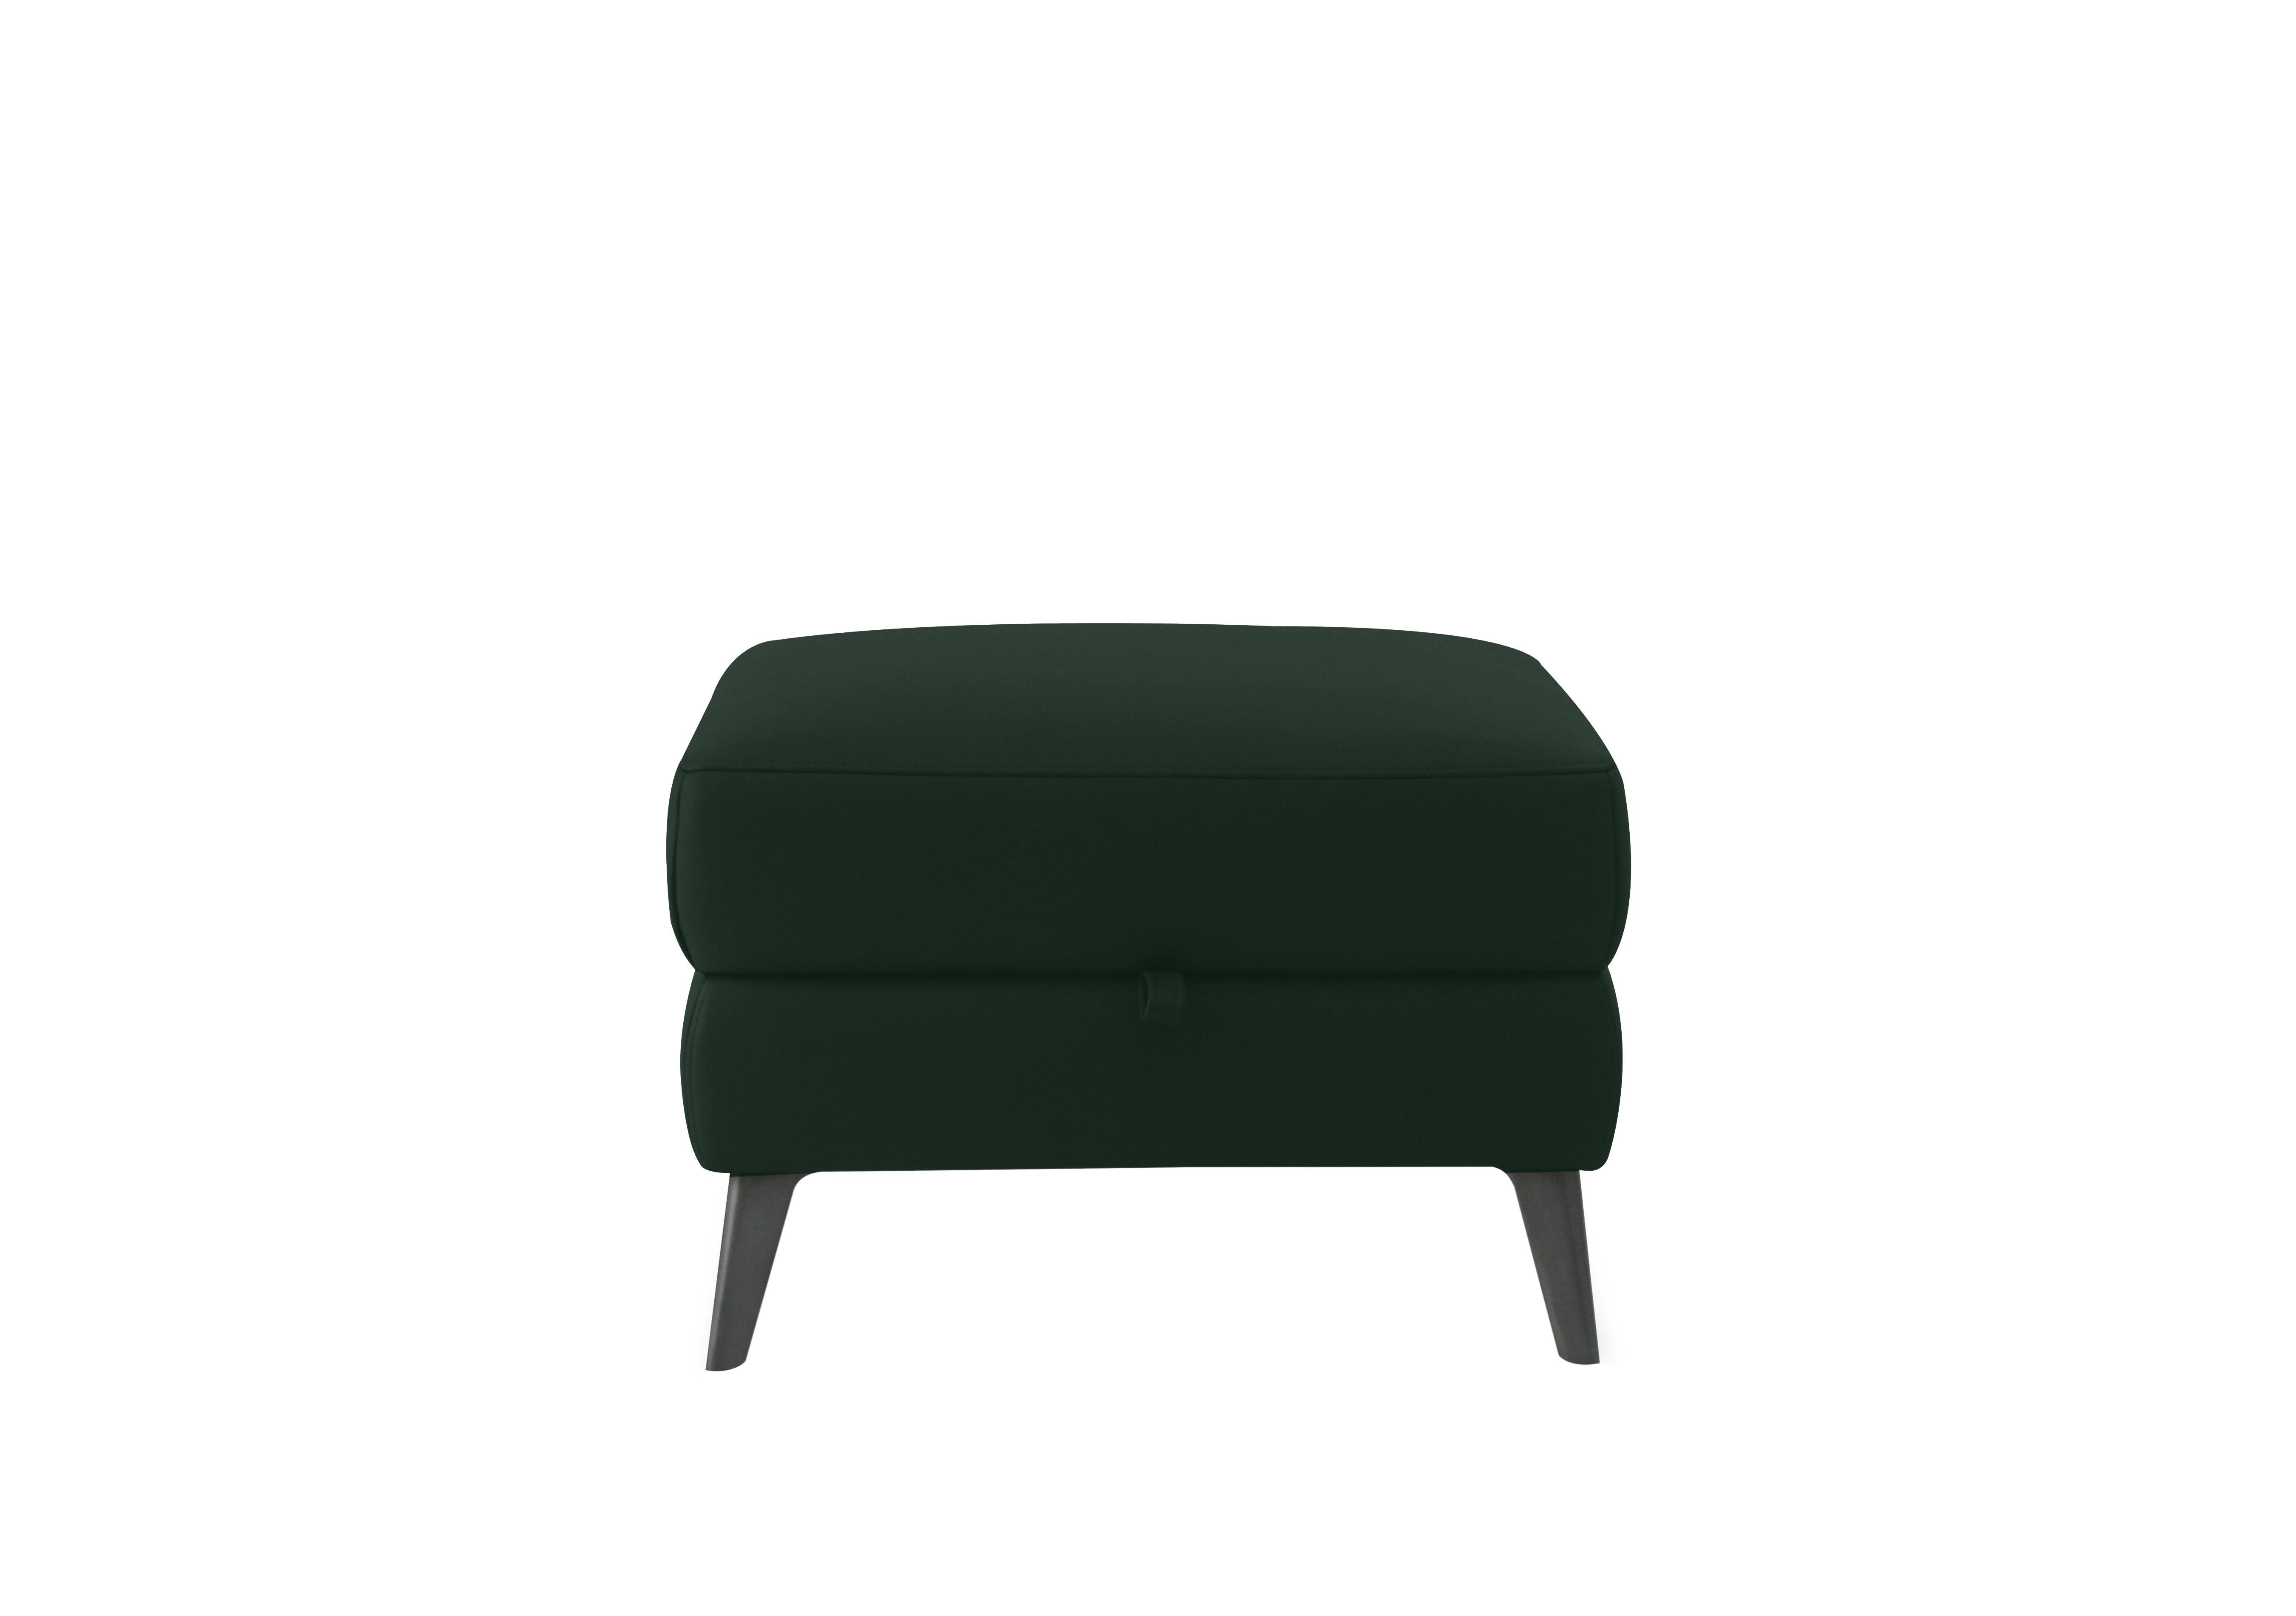 Maddox Leather Storage Footstool in Np-603e Dark Forest on Furniture Village